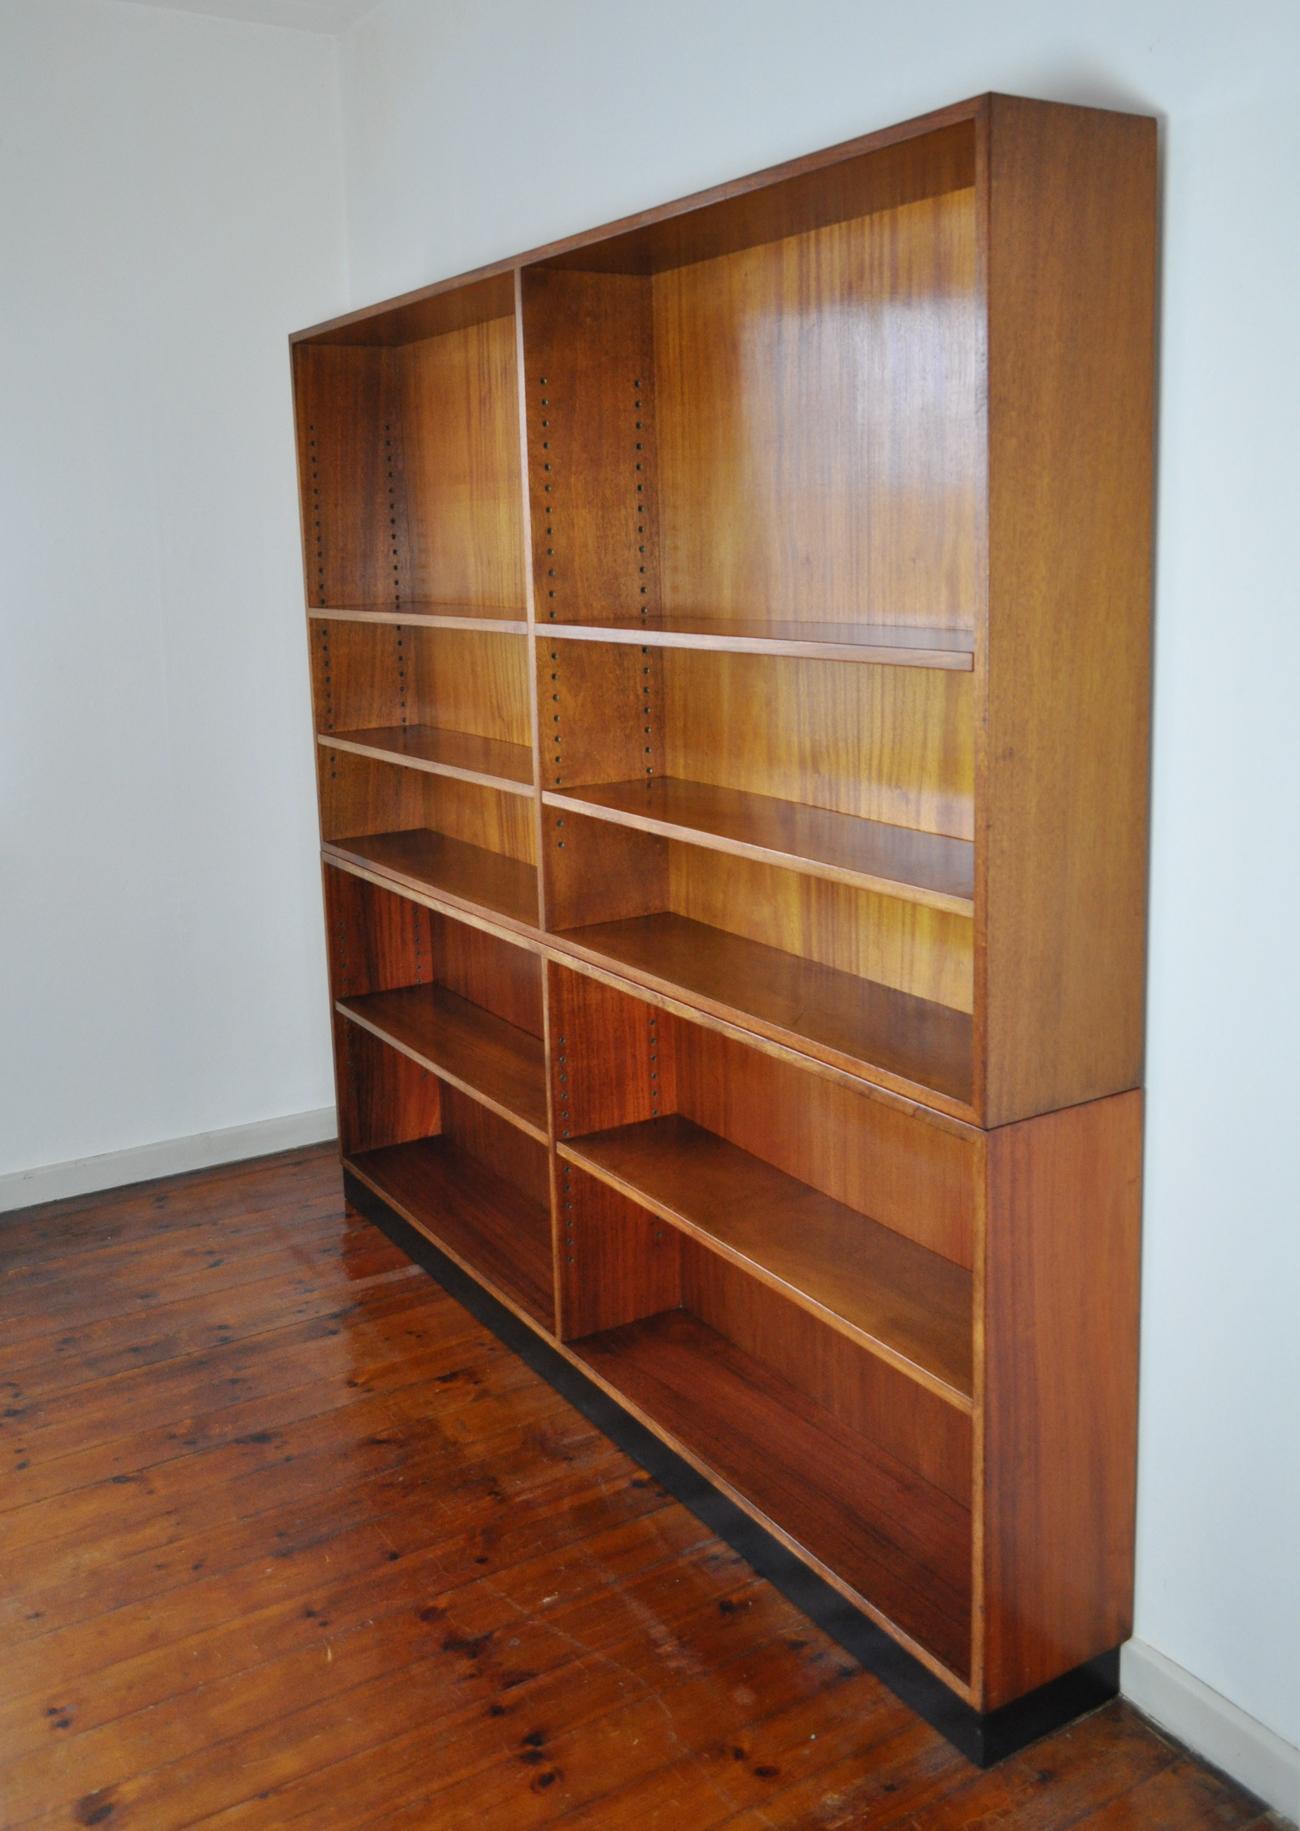 Large Rud. Rasmussen bookcase in two sections made of solid mahogany, bottom section on black painted base. Features 7 adjustable shelves, brass lined holes. Labeled by maker Rud Rasmussen. Height lower part 80, upper part 110 cm.

Very fine